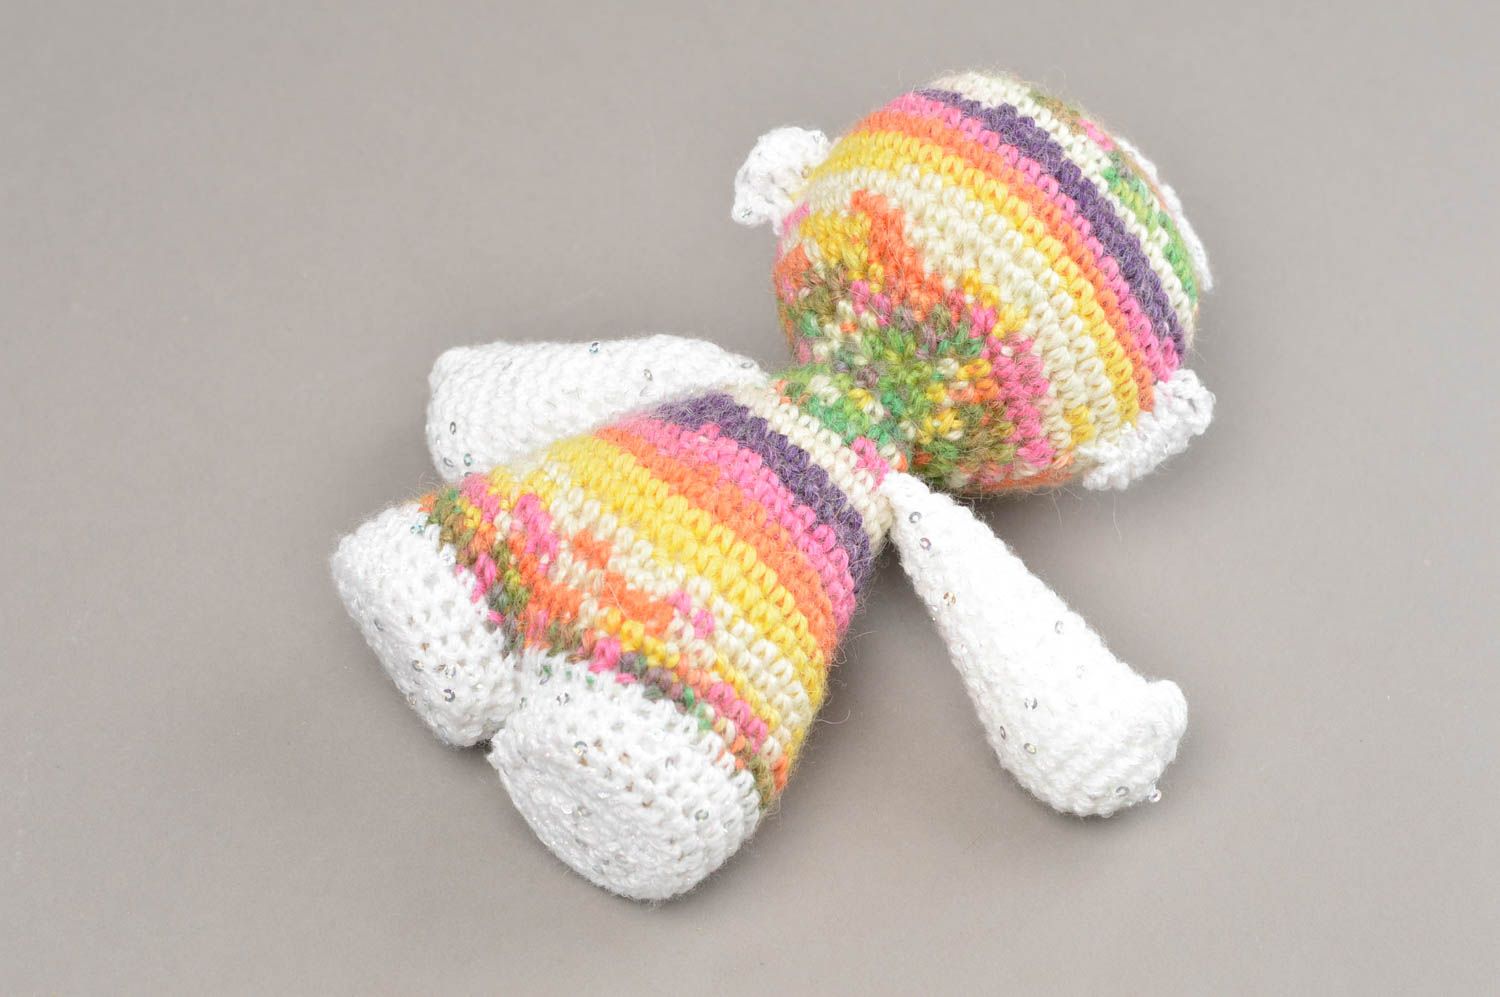 Handmade designer soft toy unusual cute presents for kids crocheted souvenirs photo 4